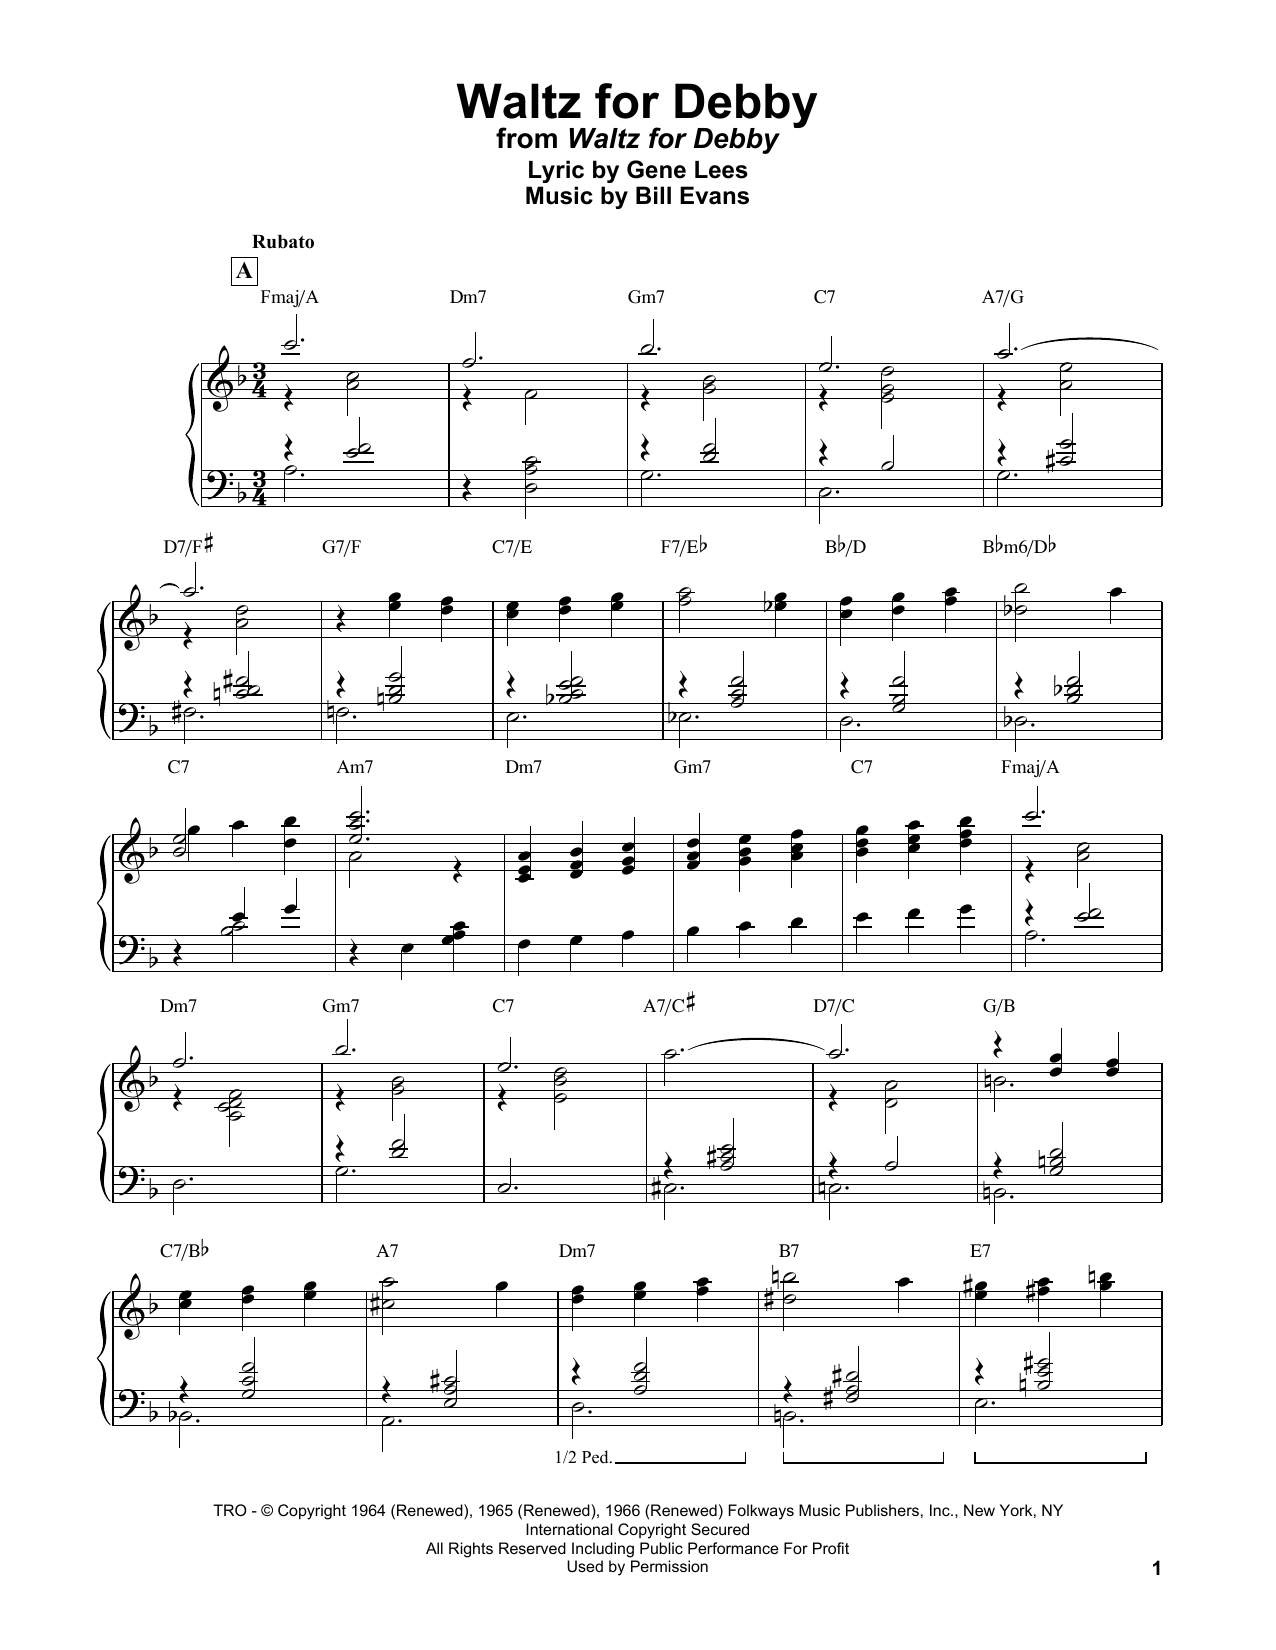 Bill Evans Waltz For Debby sheet music notes and chords. Download Printable PDF.